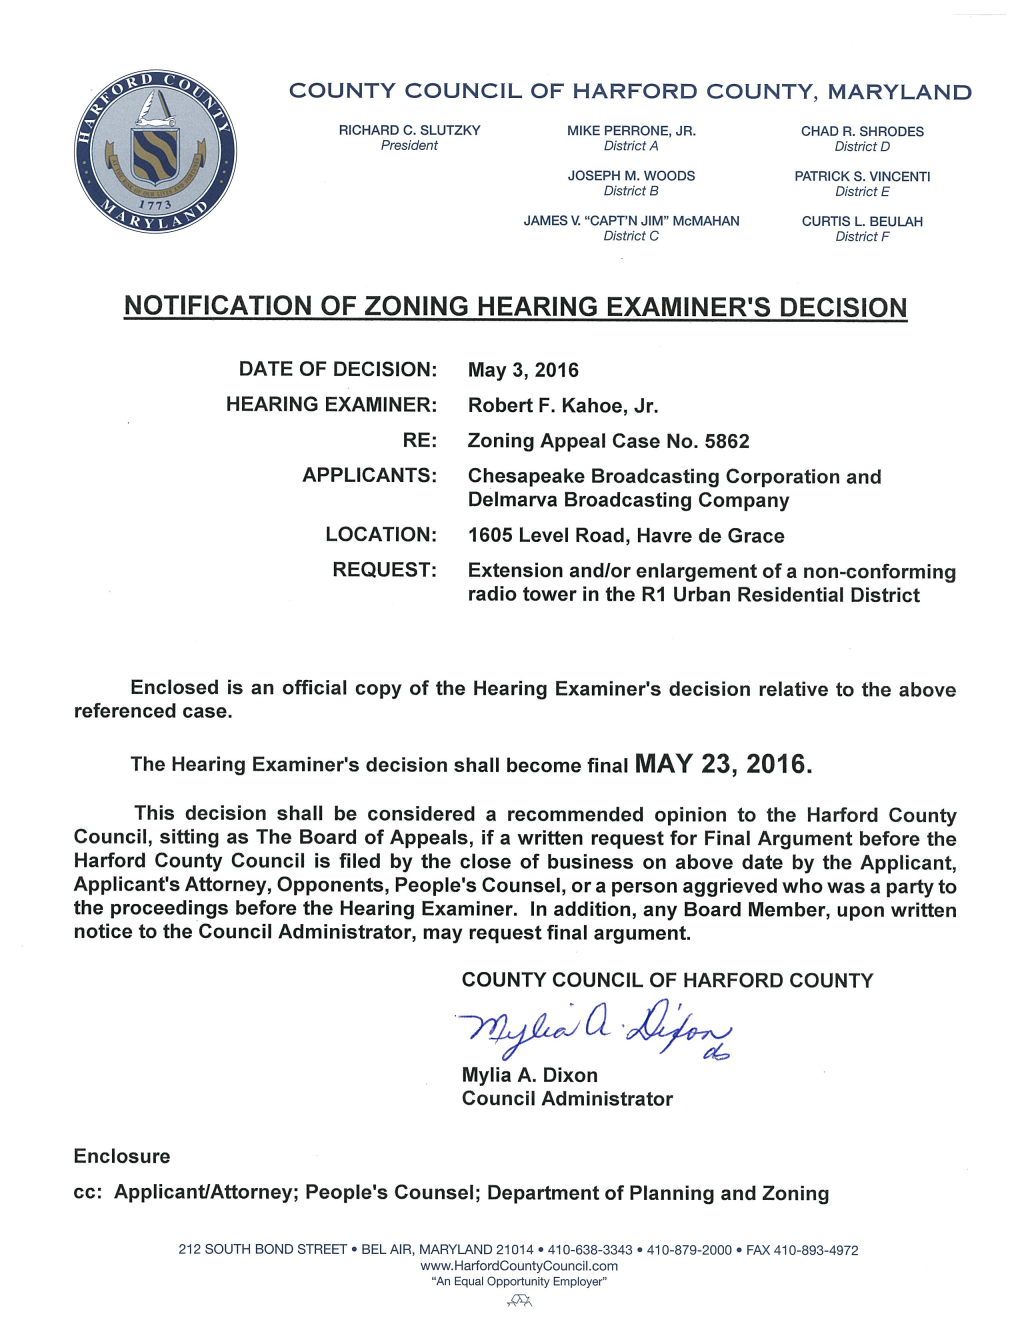 Notification of Zoning Hearing Examiner's Decision